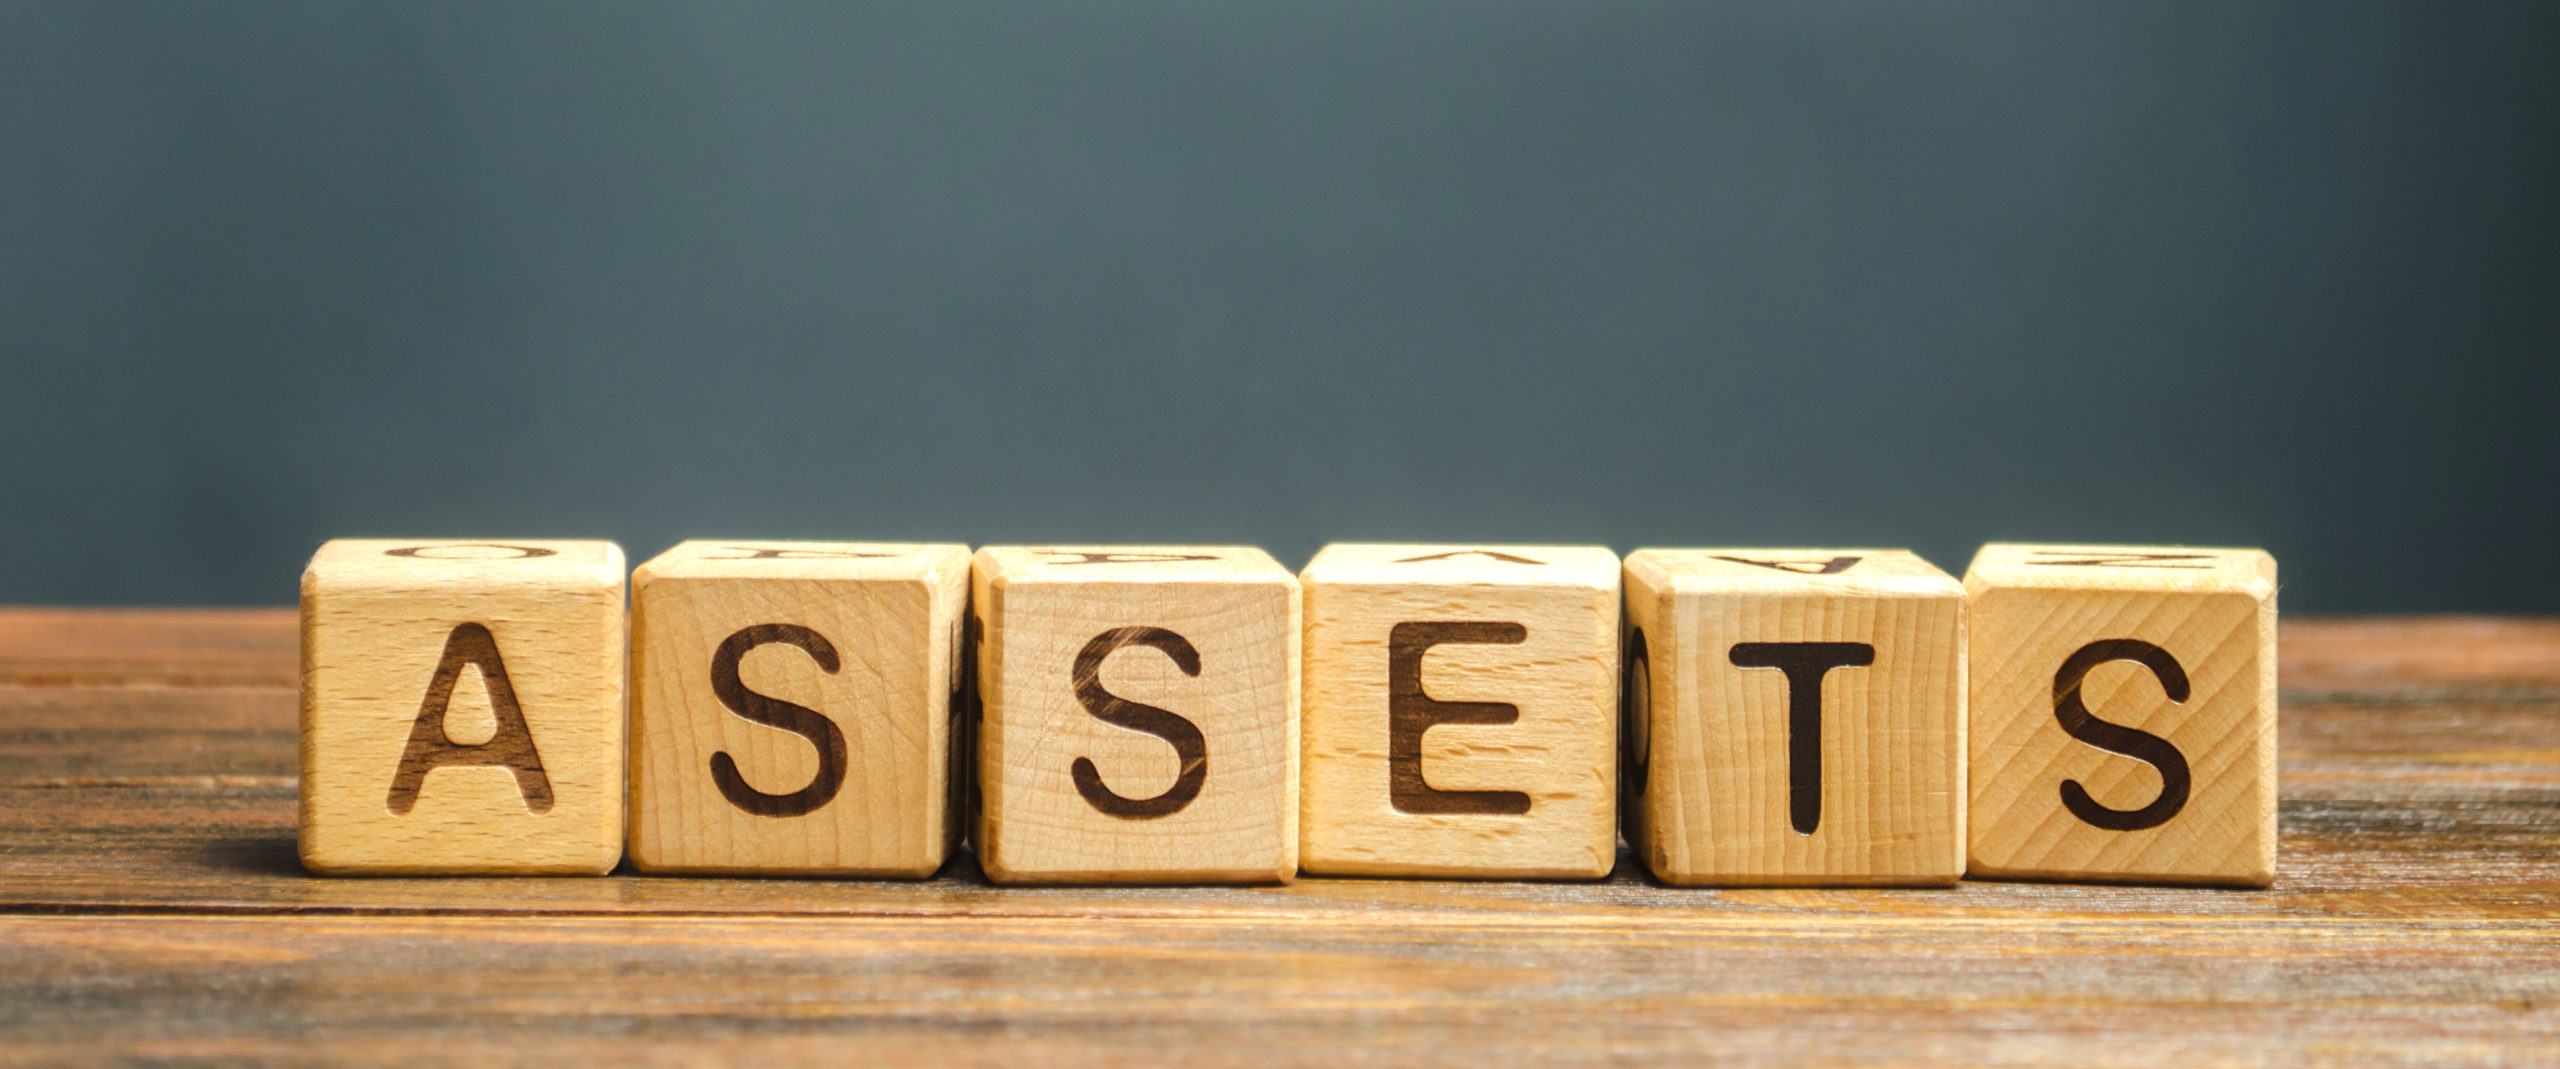 The word "assets" is spelled out in small wooden block letters. The letters sit on a wood surface in front of a dark background.